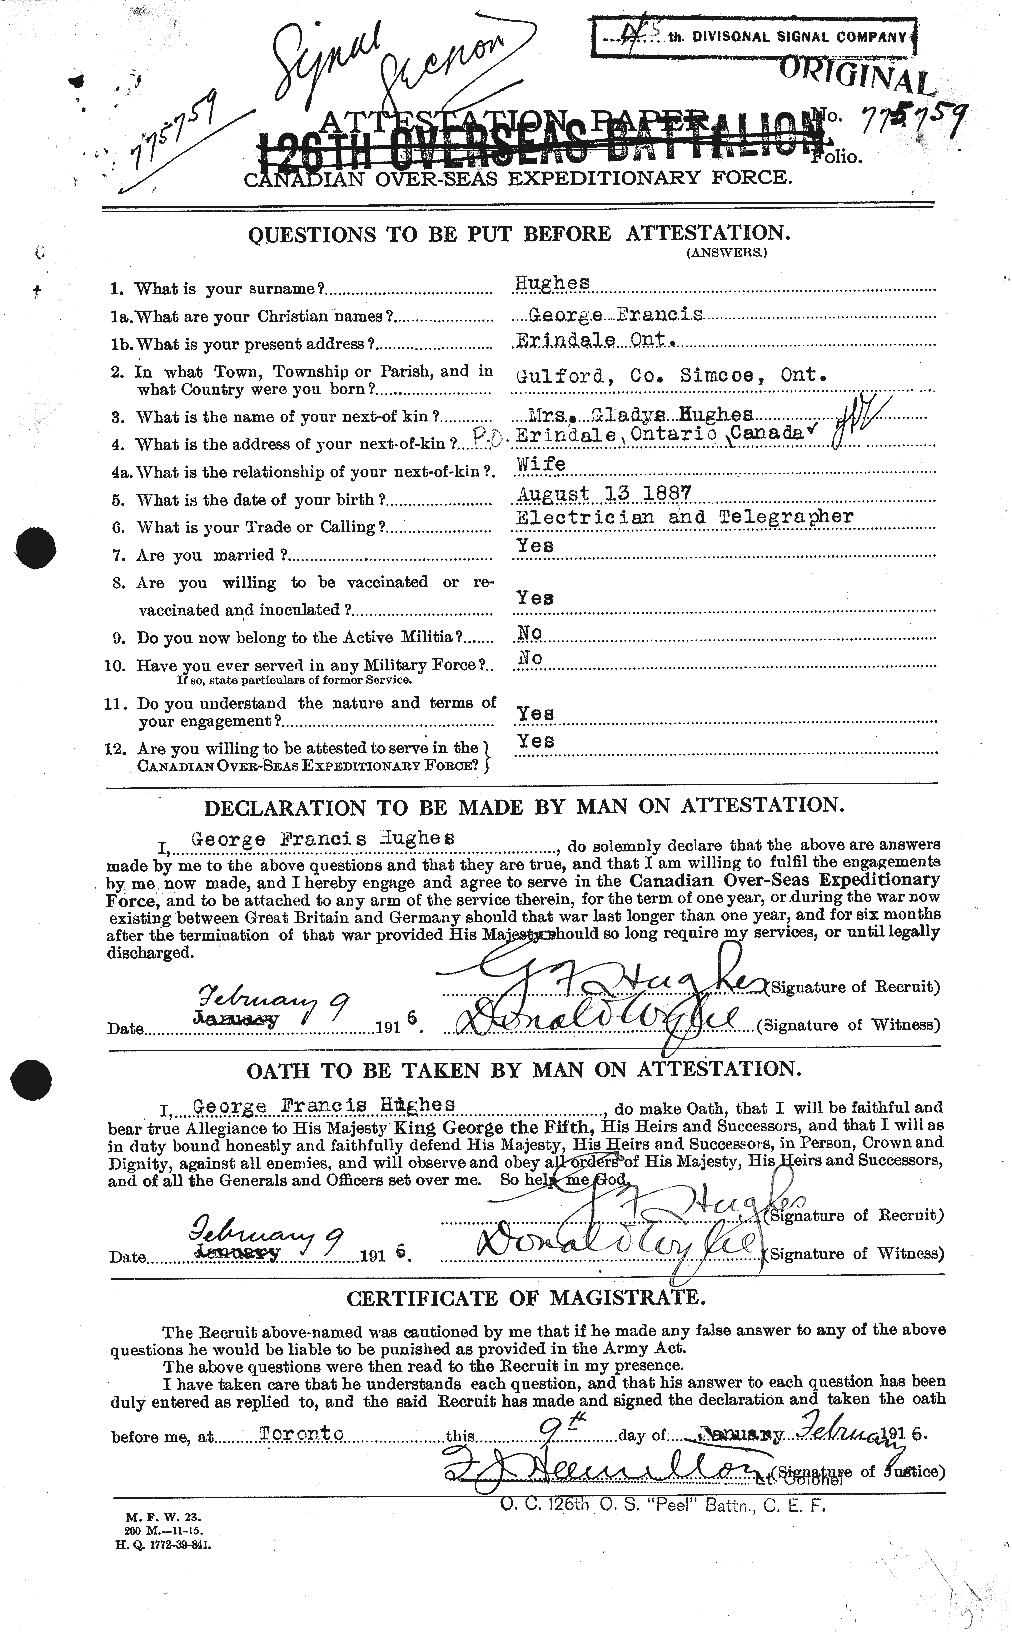 Personnel Records of the First World War - CEF 403828a